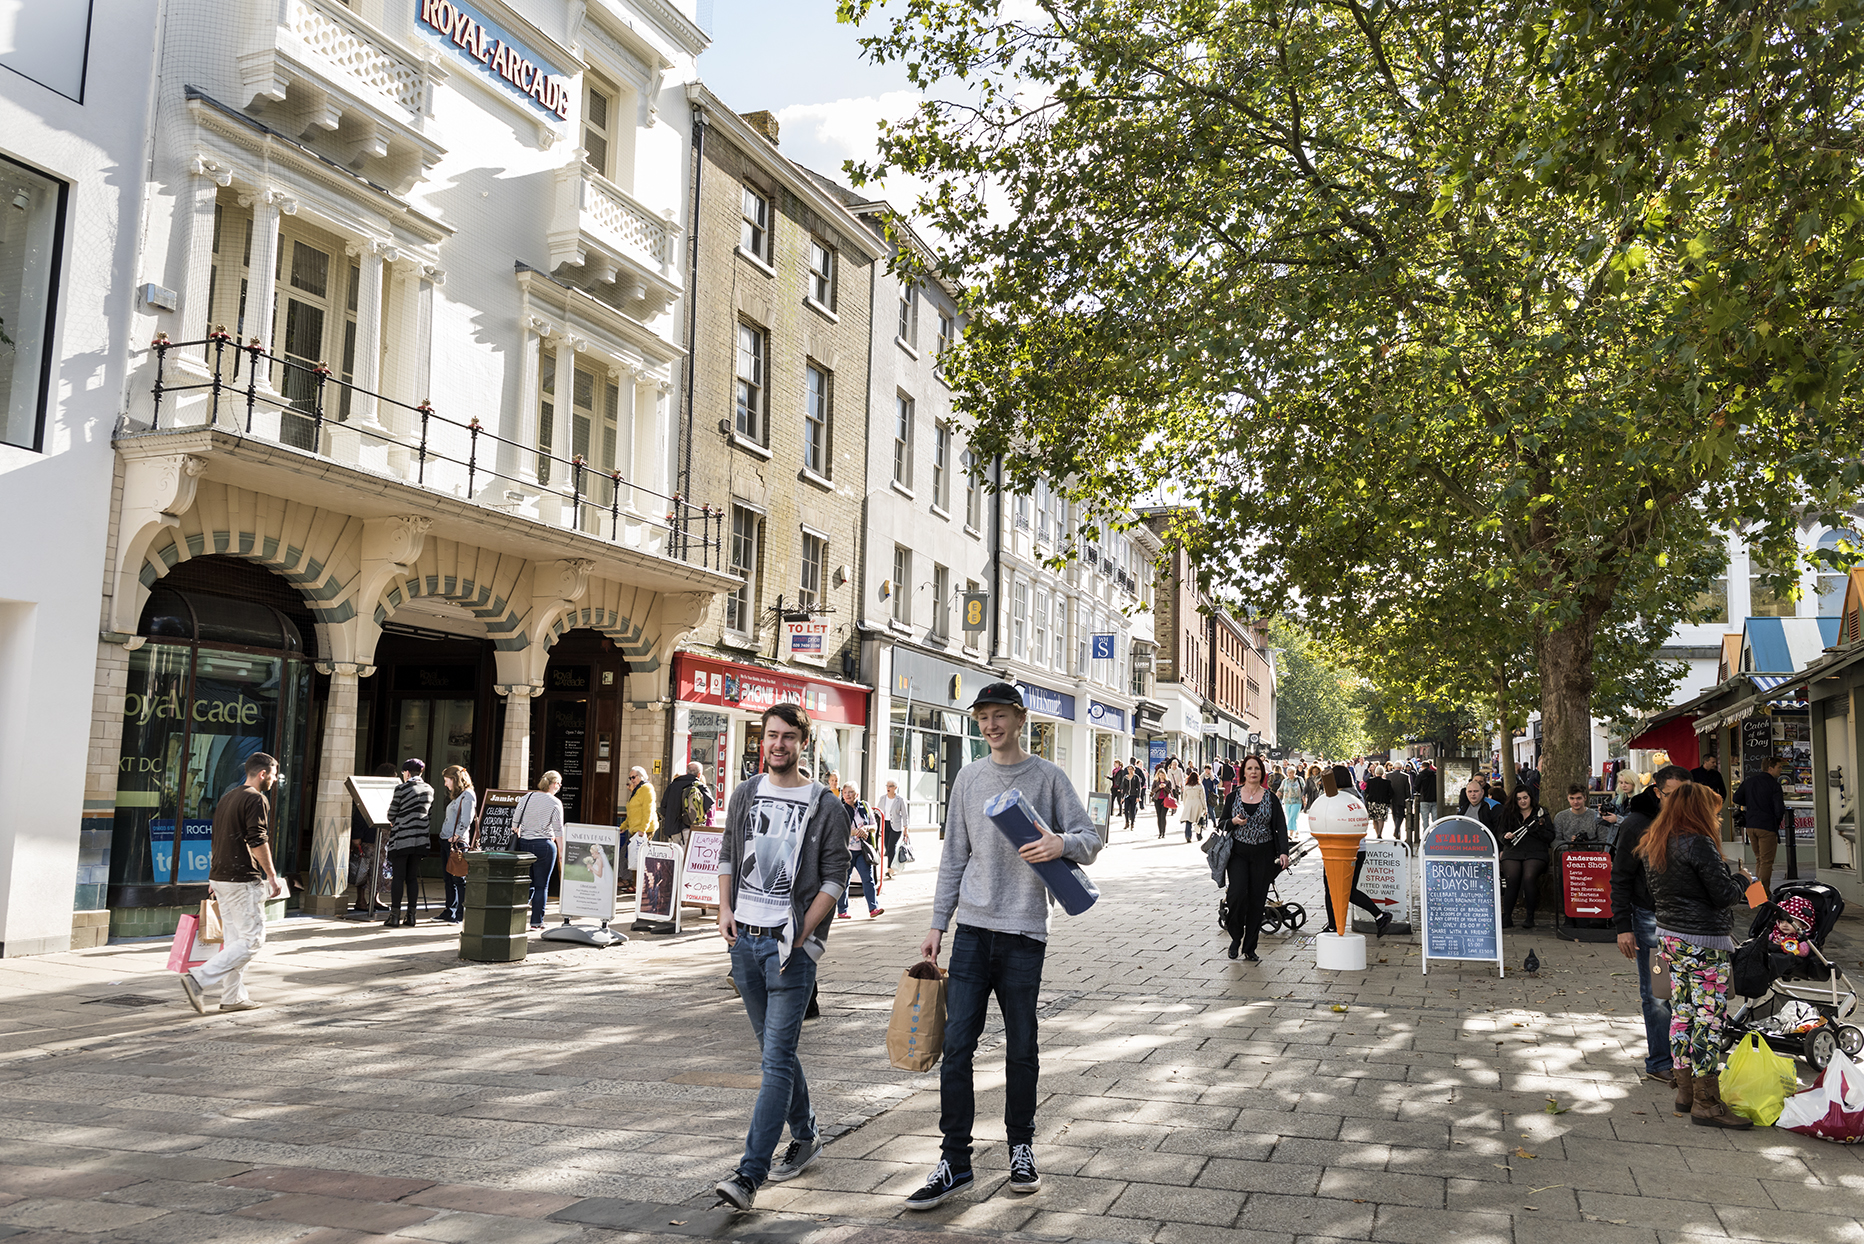 People walking along a street in Norwich during the day